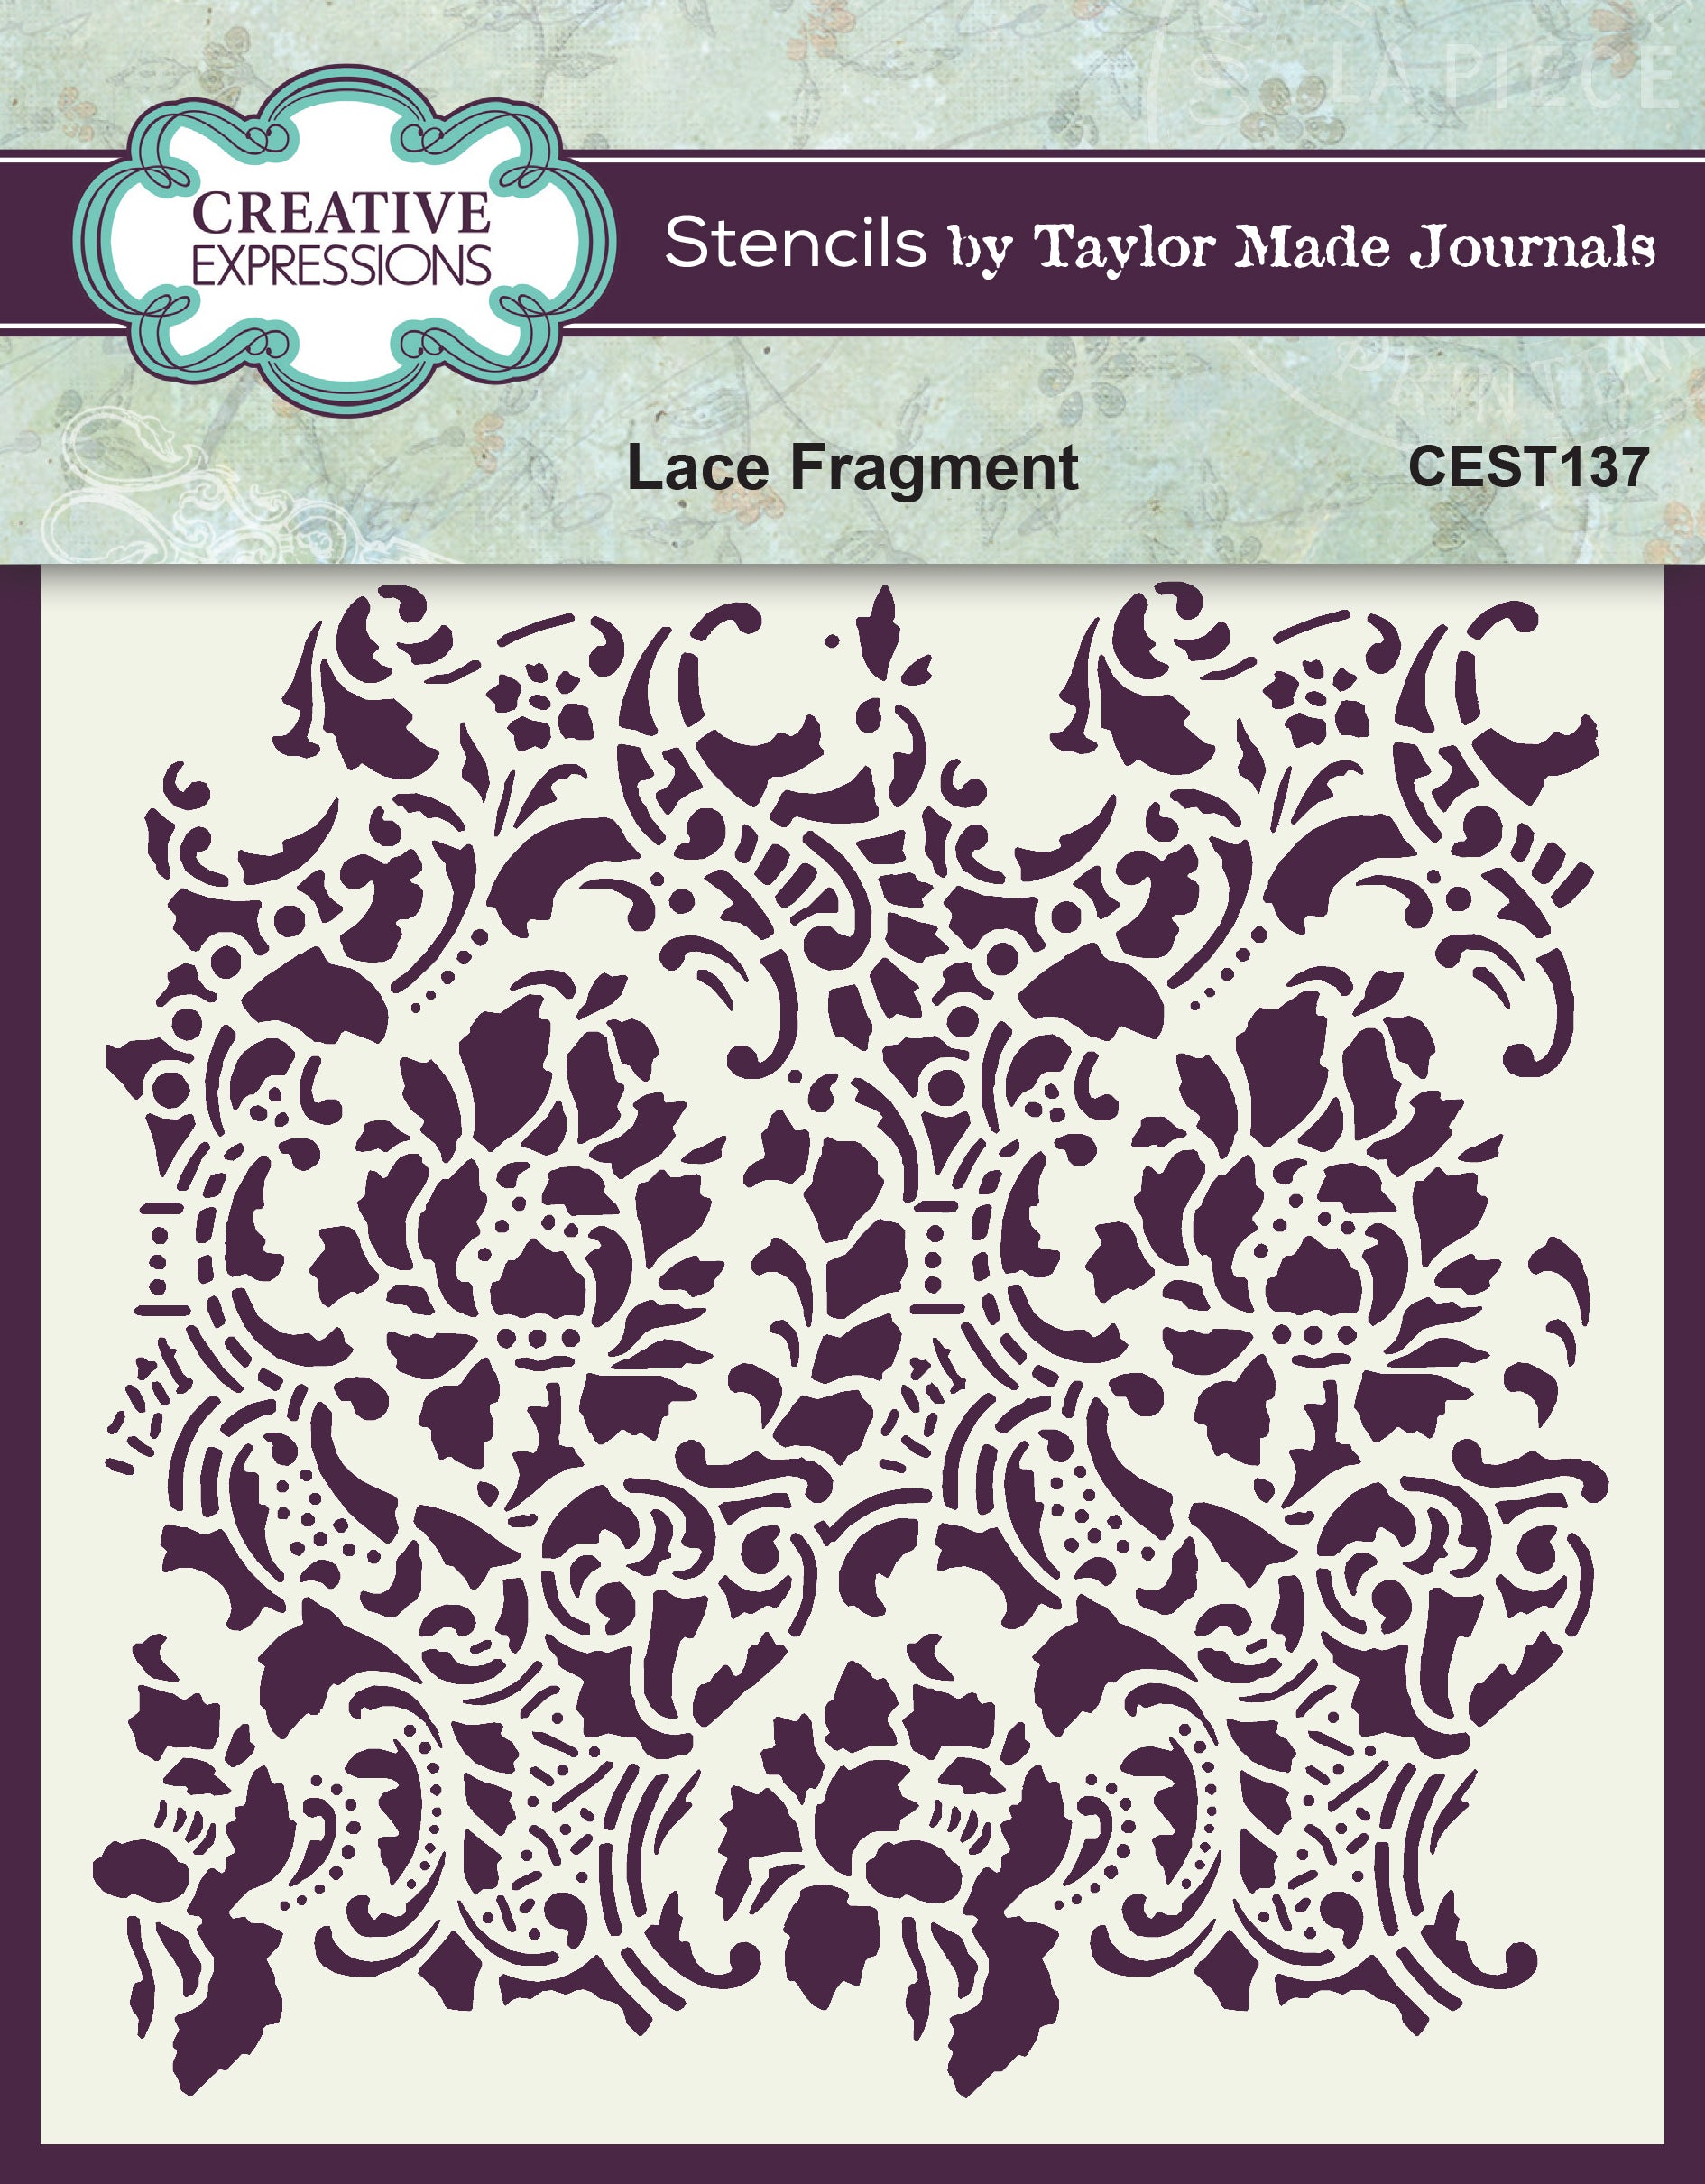 Creative Expressions Taylor Made Journals Lace Fragment 6 in x 6 in Stencil